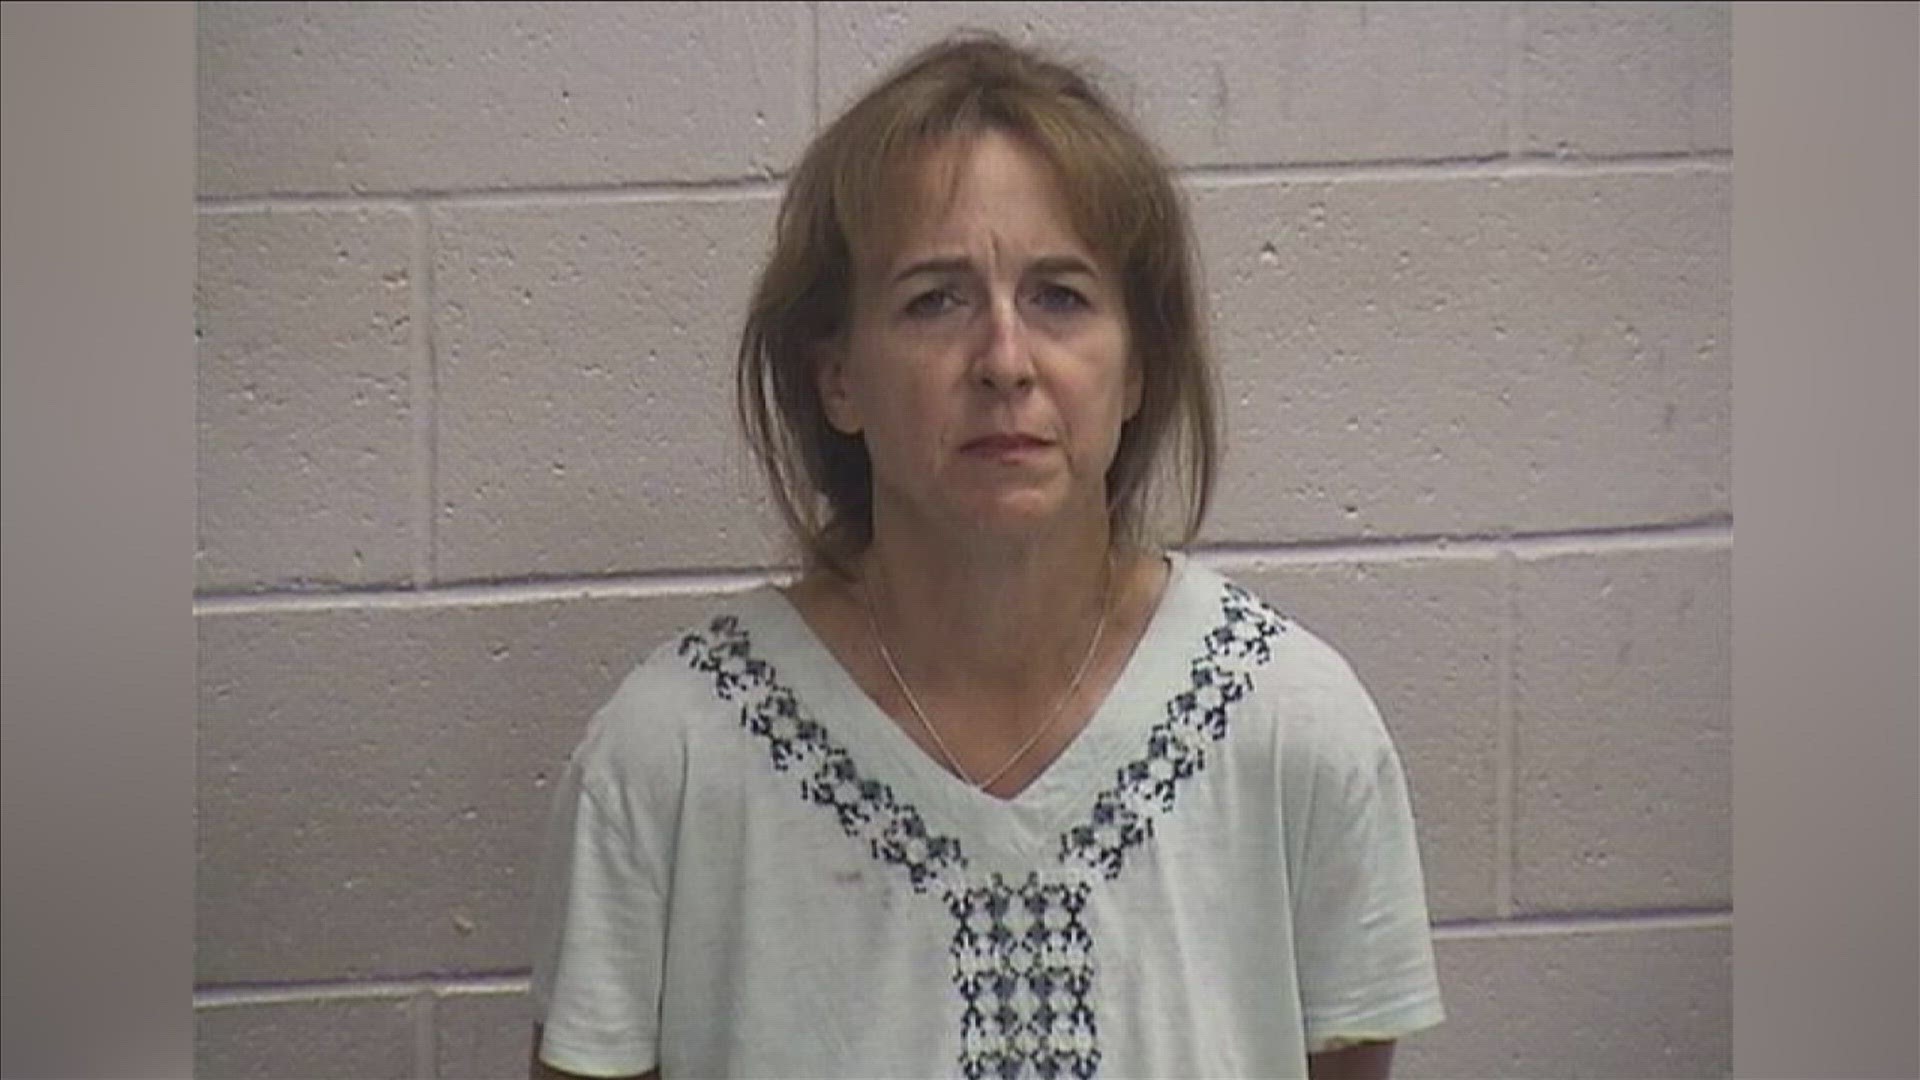 Fifty-four-year-old Angela Campbell was arrested and charged with murder Sunday night after Horn Lake Police found her father and brother with stab wounds.